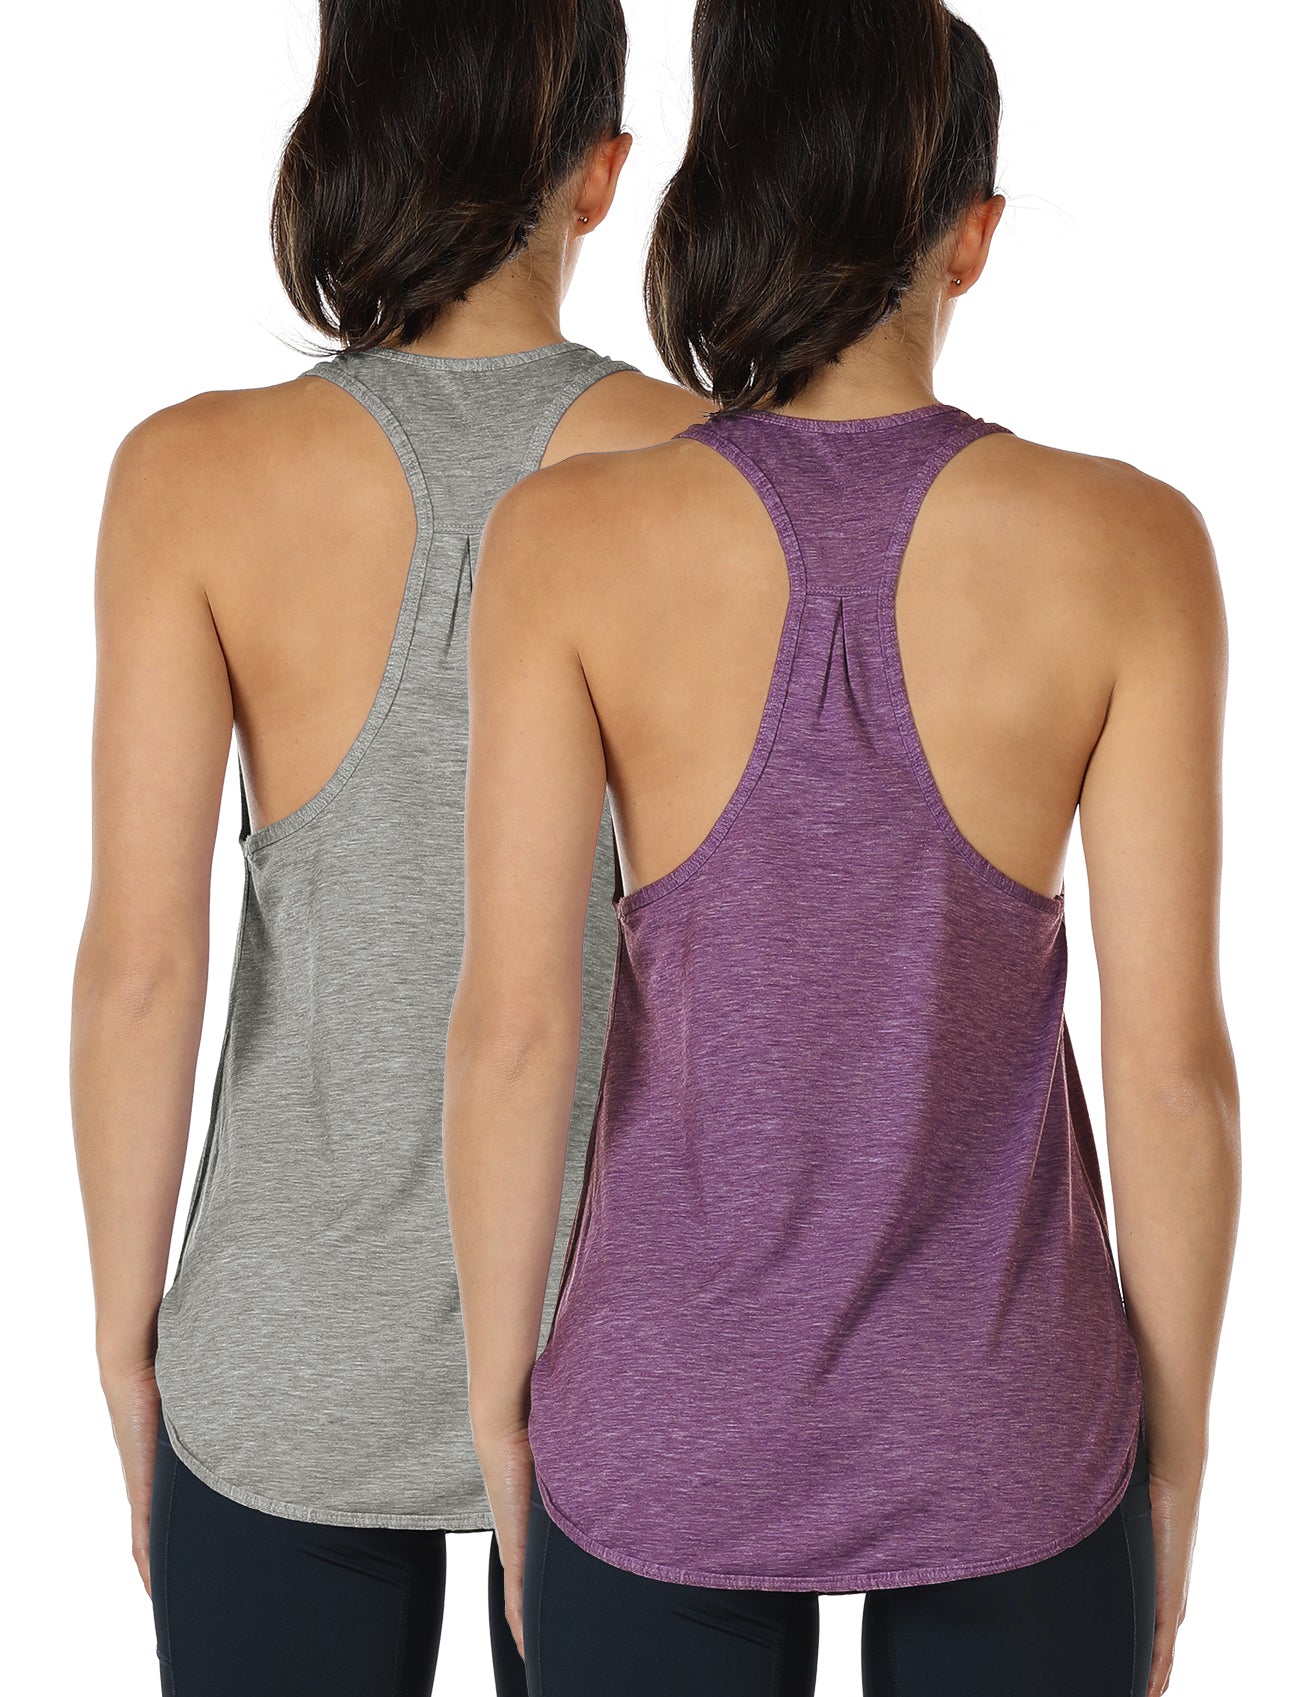 icyzone Workout Tank Tops for Women - Racerback Athletic Yoga Tops, Running  Exercise Gym Shirts (XL, Orange Heather) in Bahrain